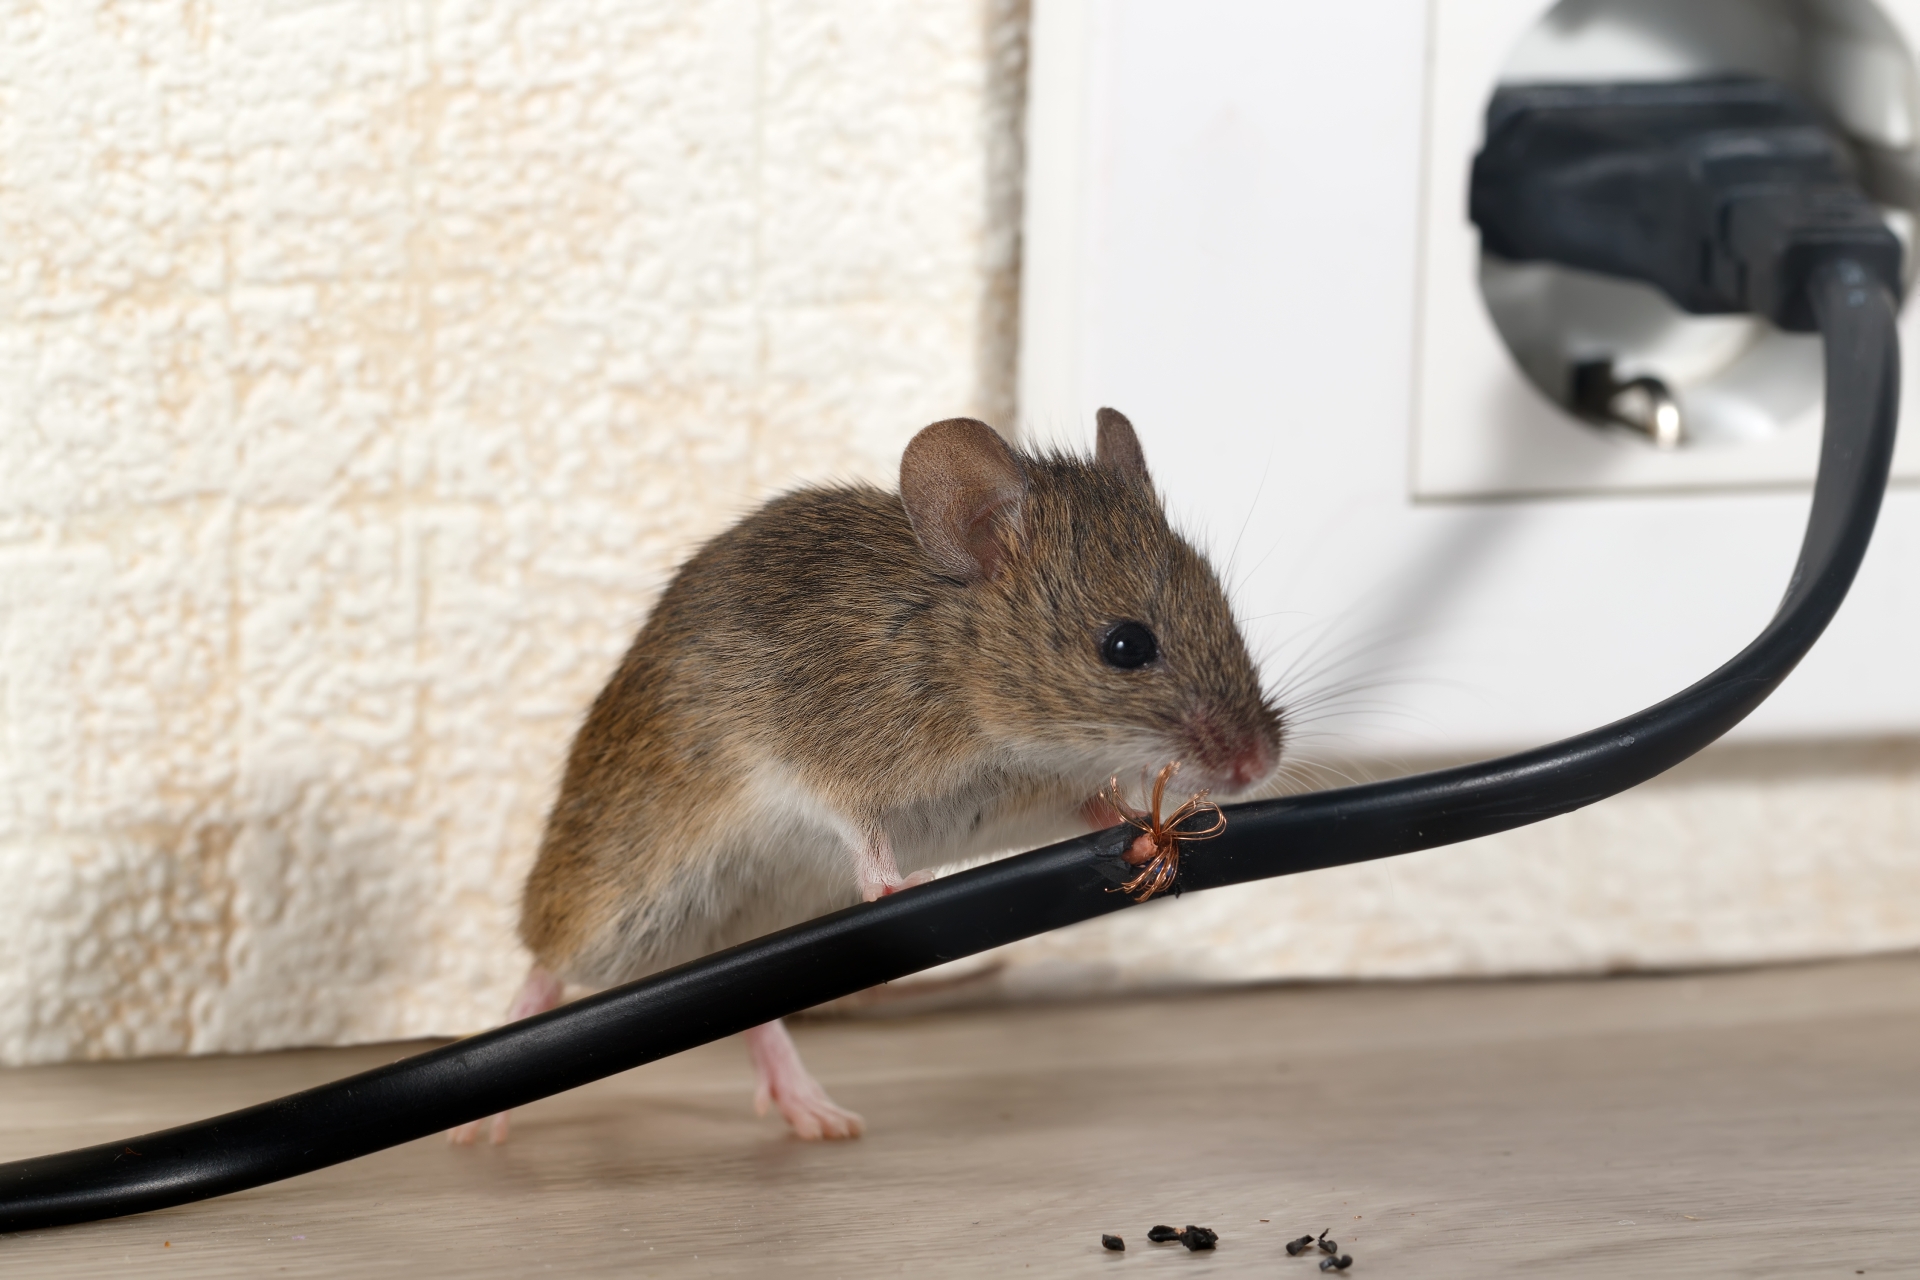 Mice Infestation, Pest Control in Rotherhithe, South Bermondsey, Surrey Docks, SE16. Call Now 020 8166 9746